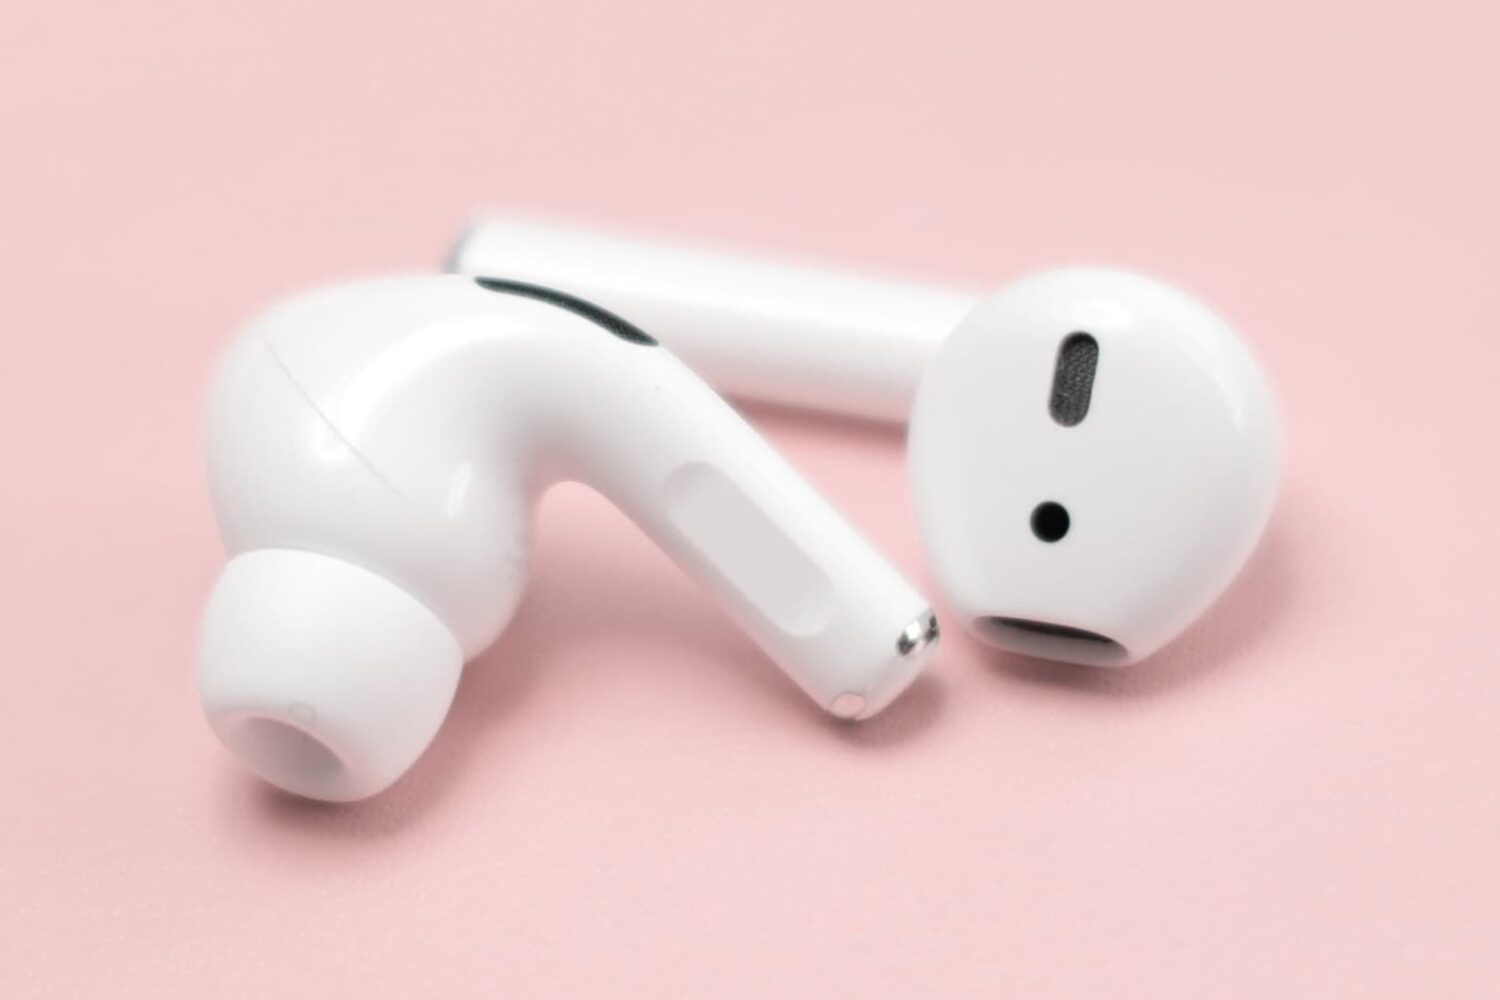 Single AirPod and AirPods Pro kept together